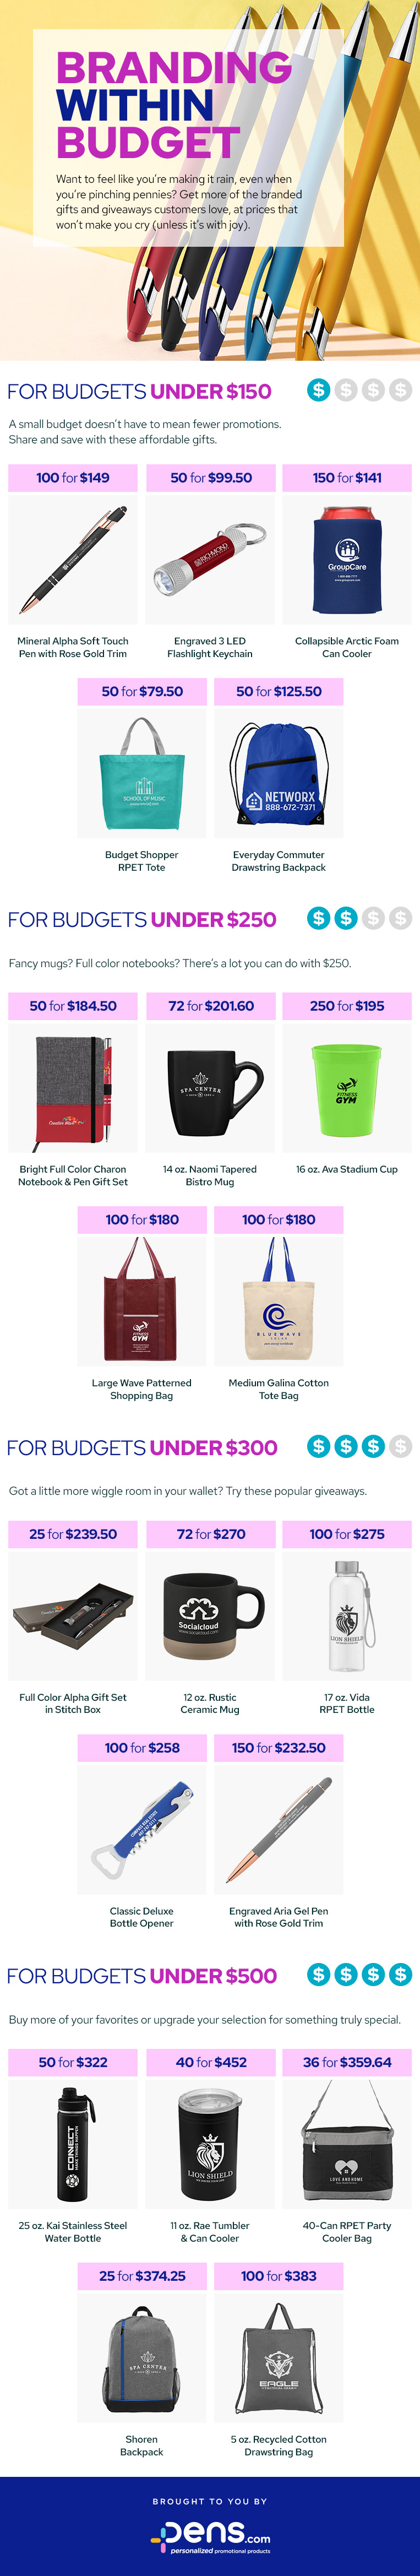 Guide to Cheap Promotional Products 